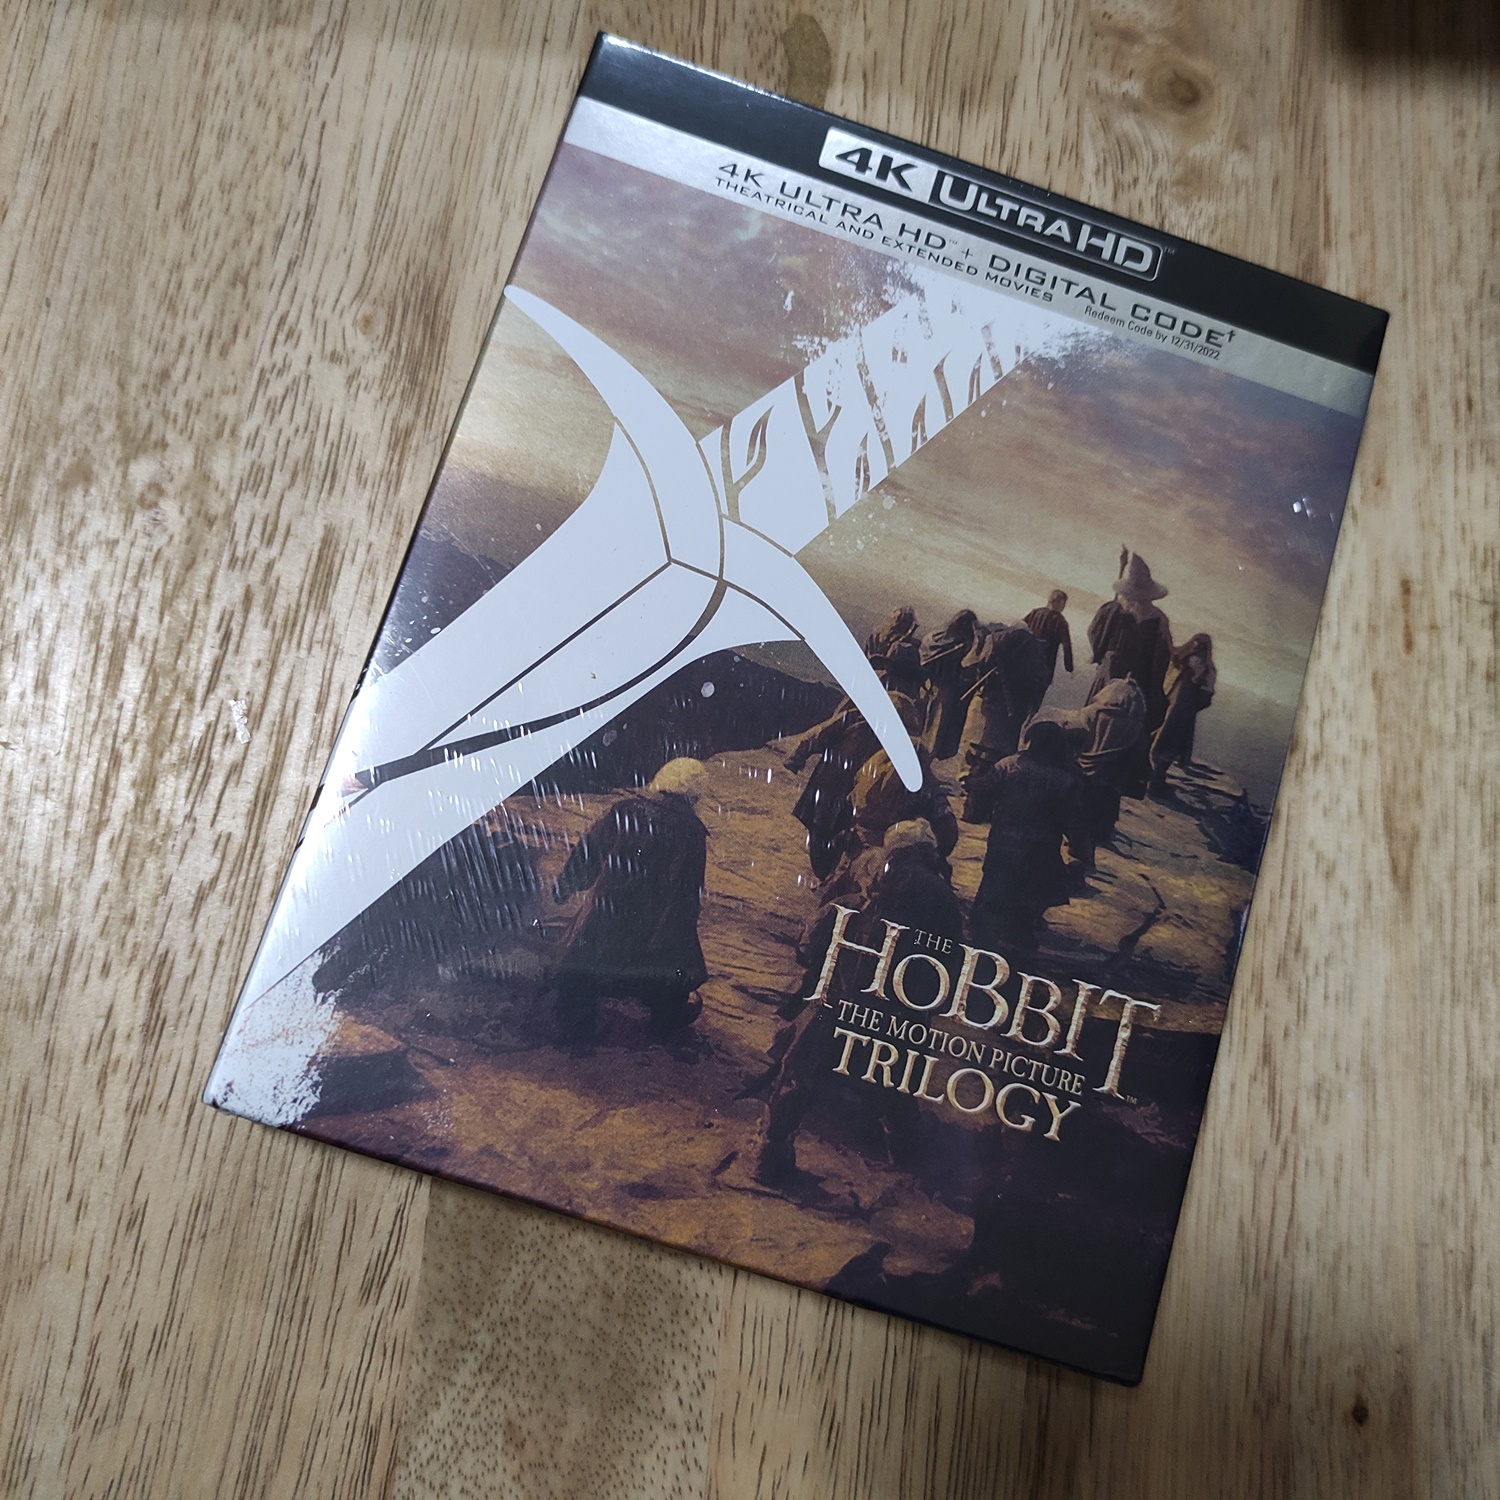 The Lord of the Rings: The Motion Picture Trilogy (Extended &  Theatrical)(4K Ultra HD)